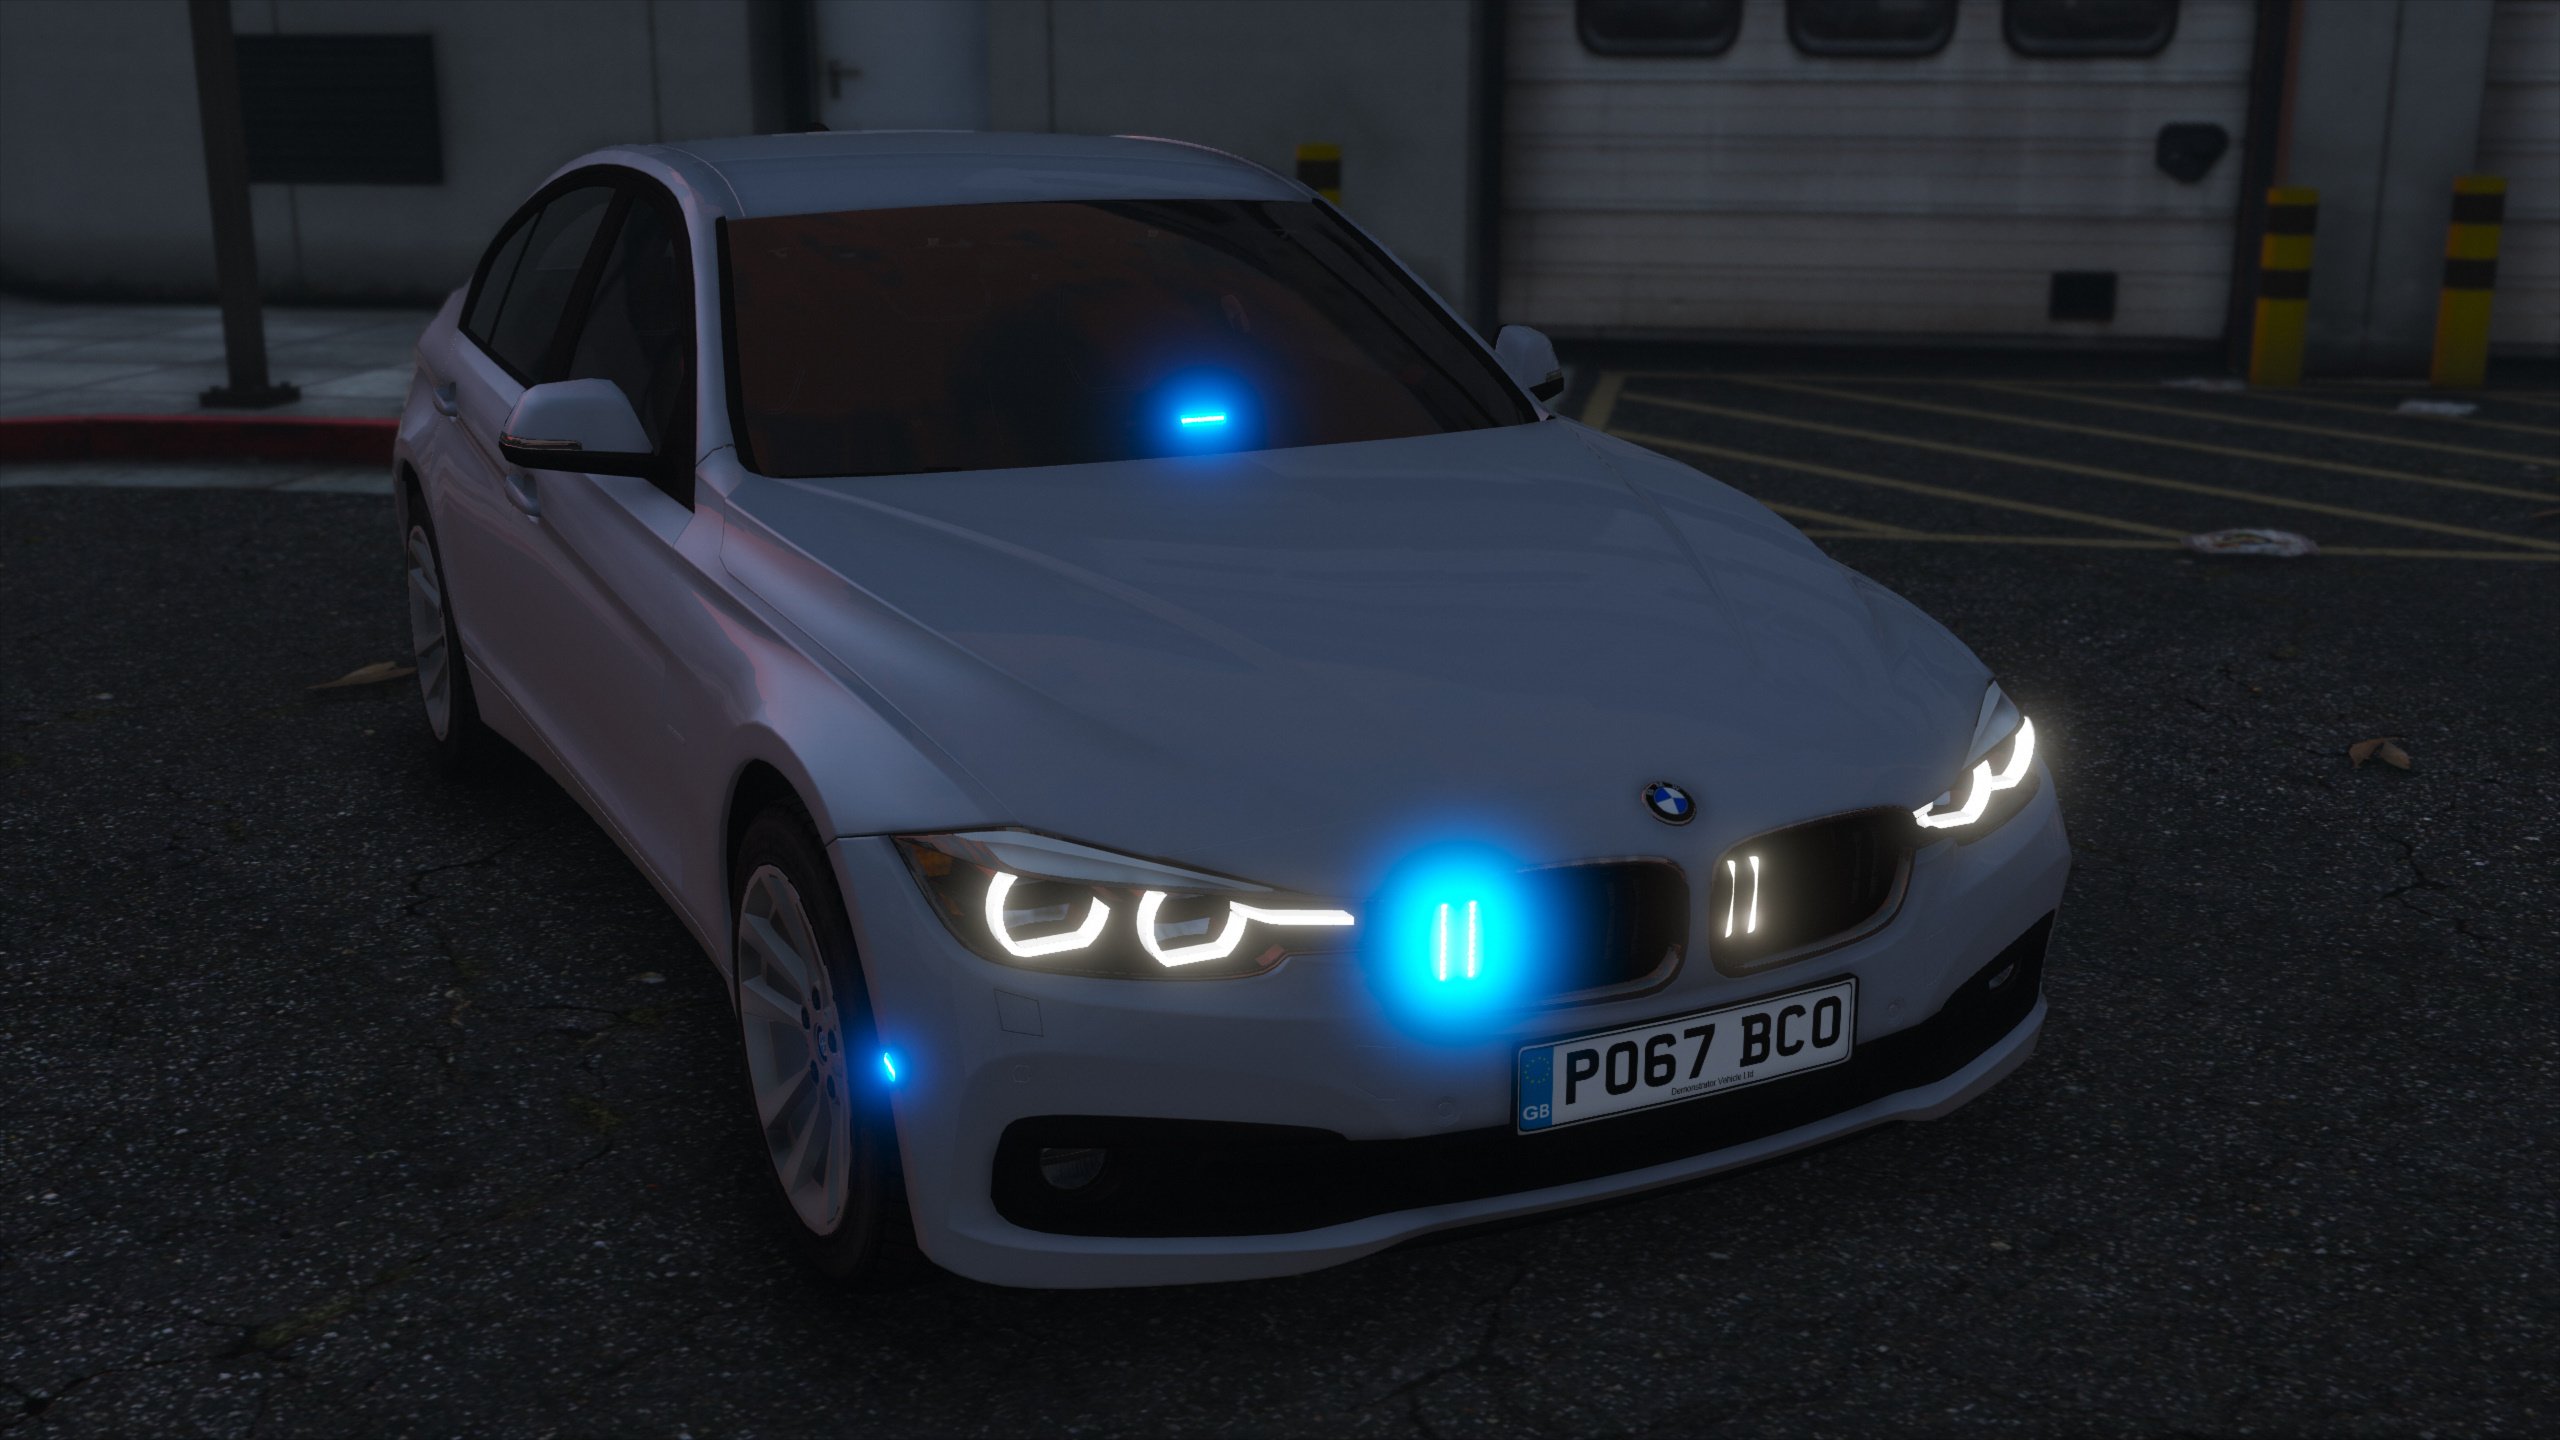 2017 Police BMW 330D Saloon Pack [Replace | ELS] - GTA5-Mods.com